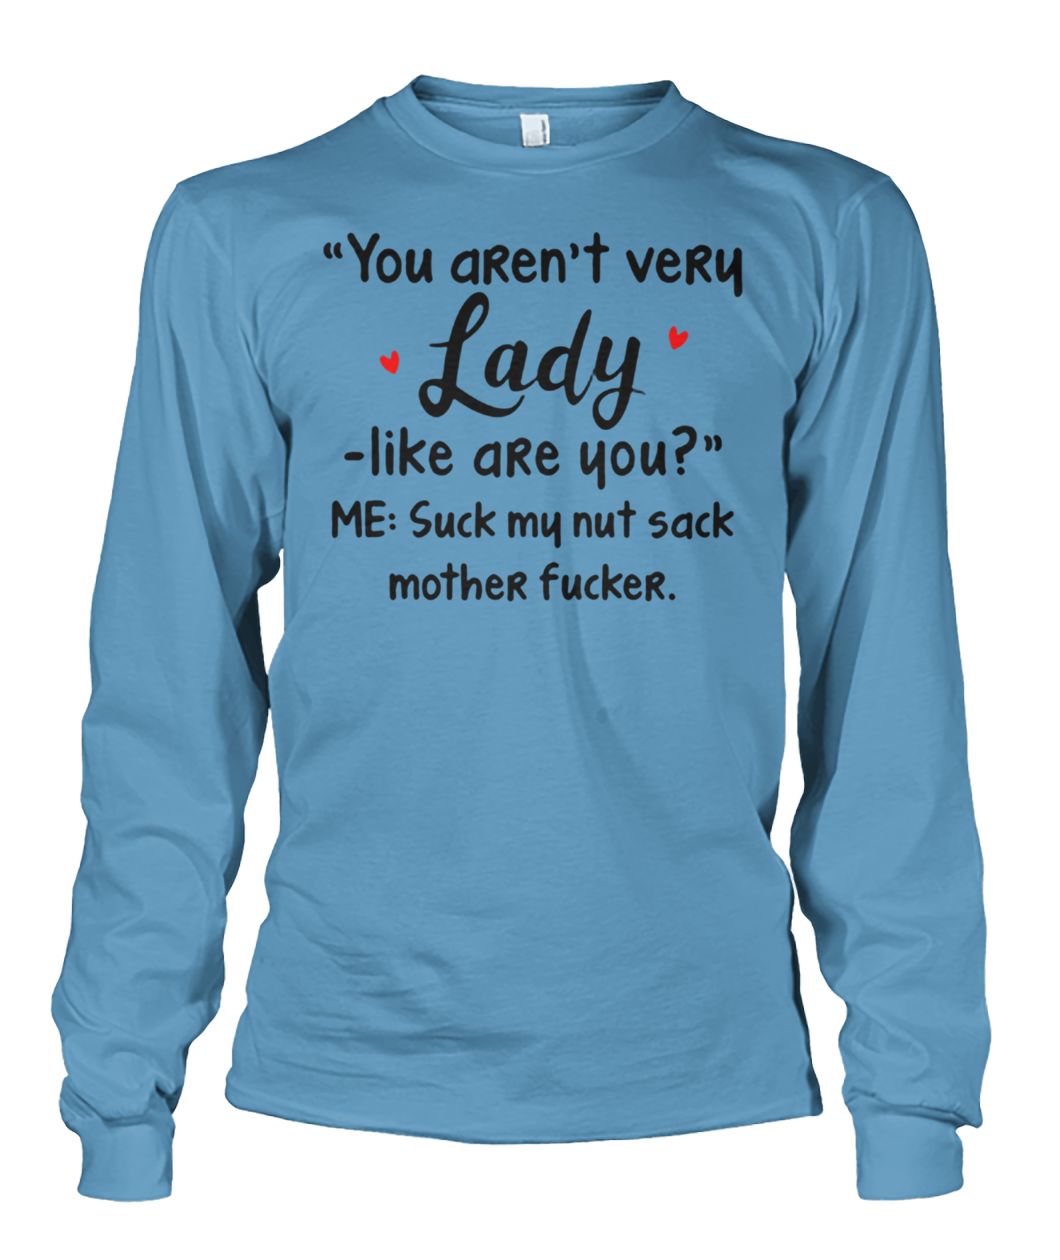 You aren't very lady like are you me suck my nut sack mother fucker unisex long sleeve